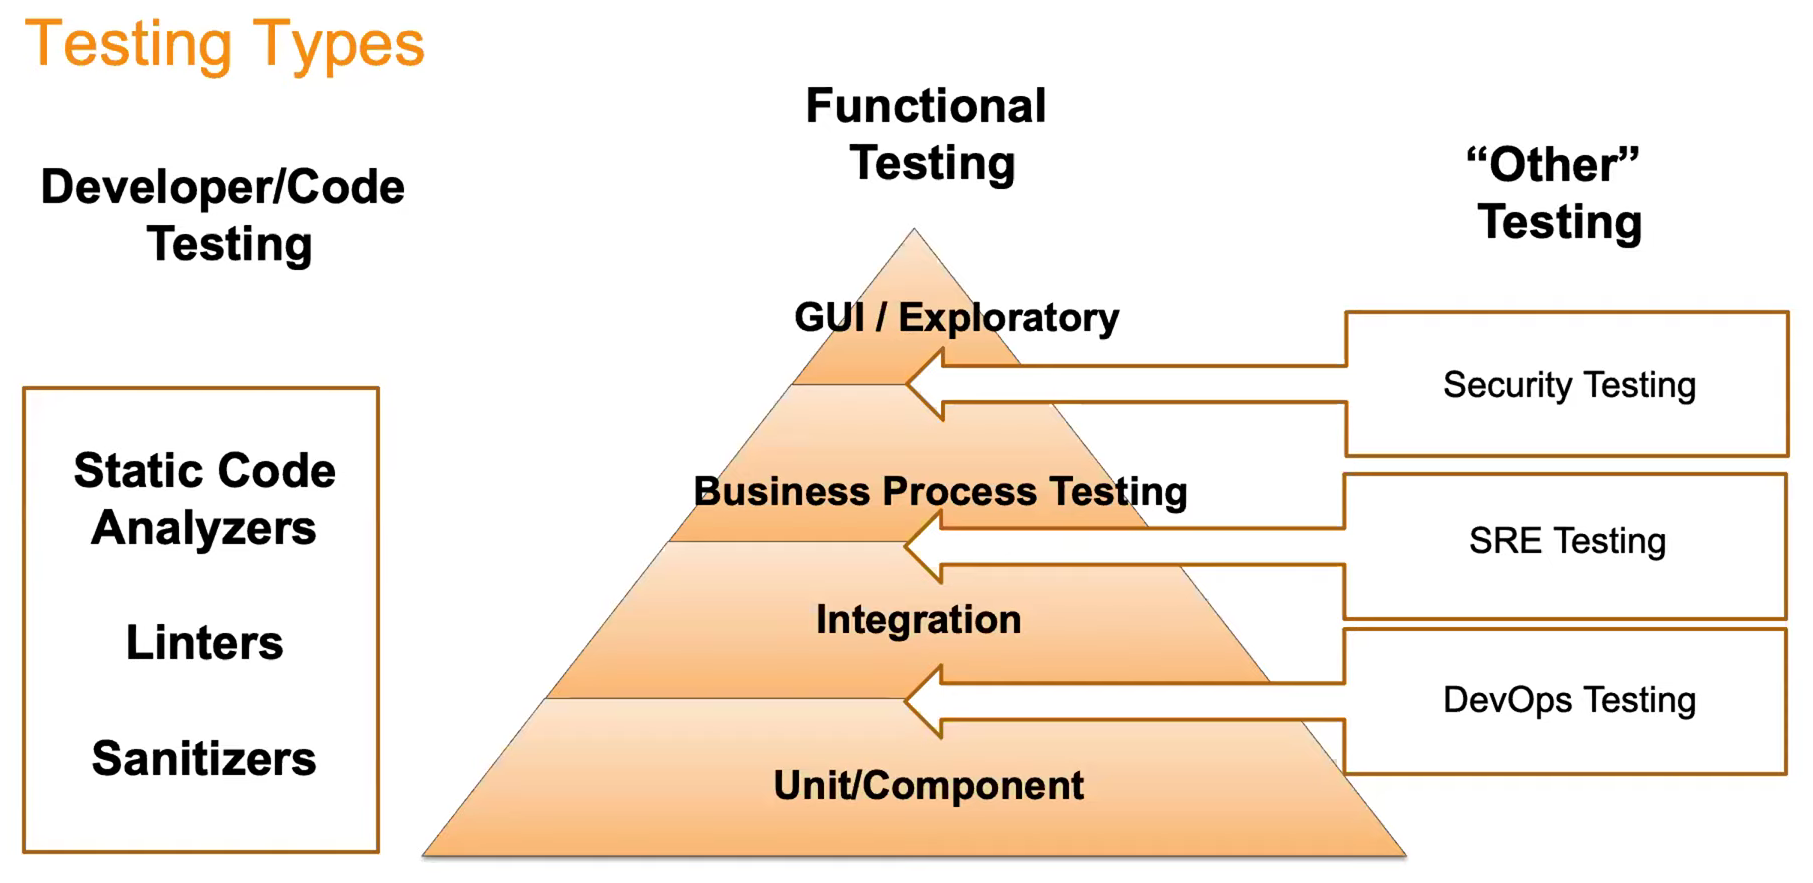 This image illustrates the different test types in test driven development (TDD).